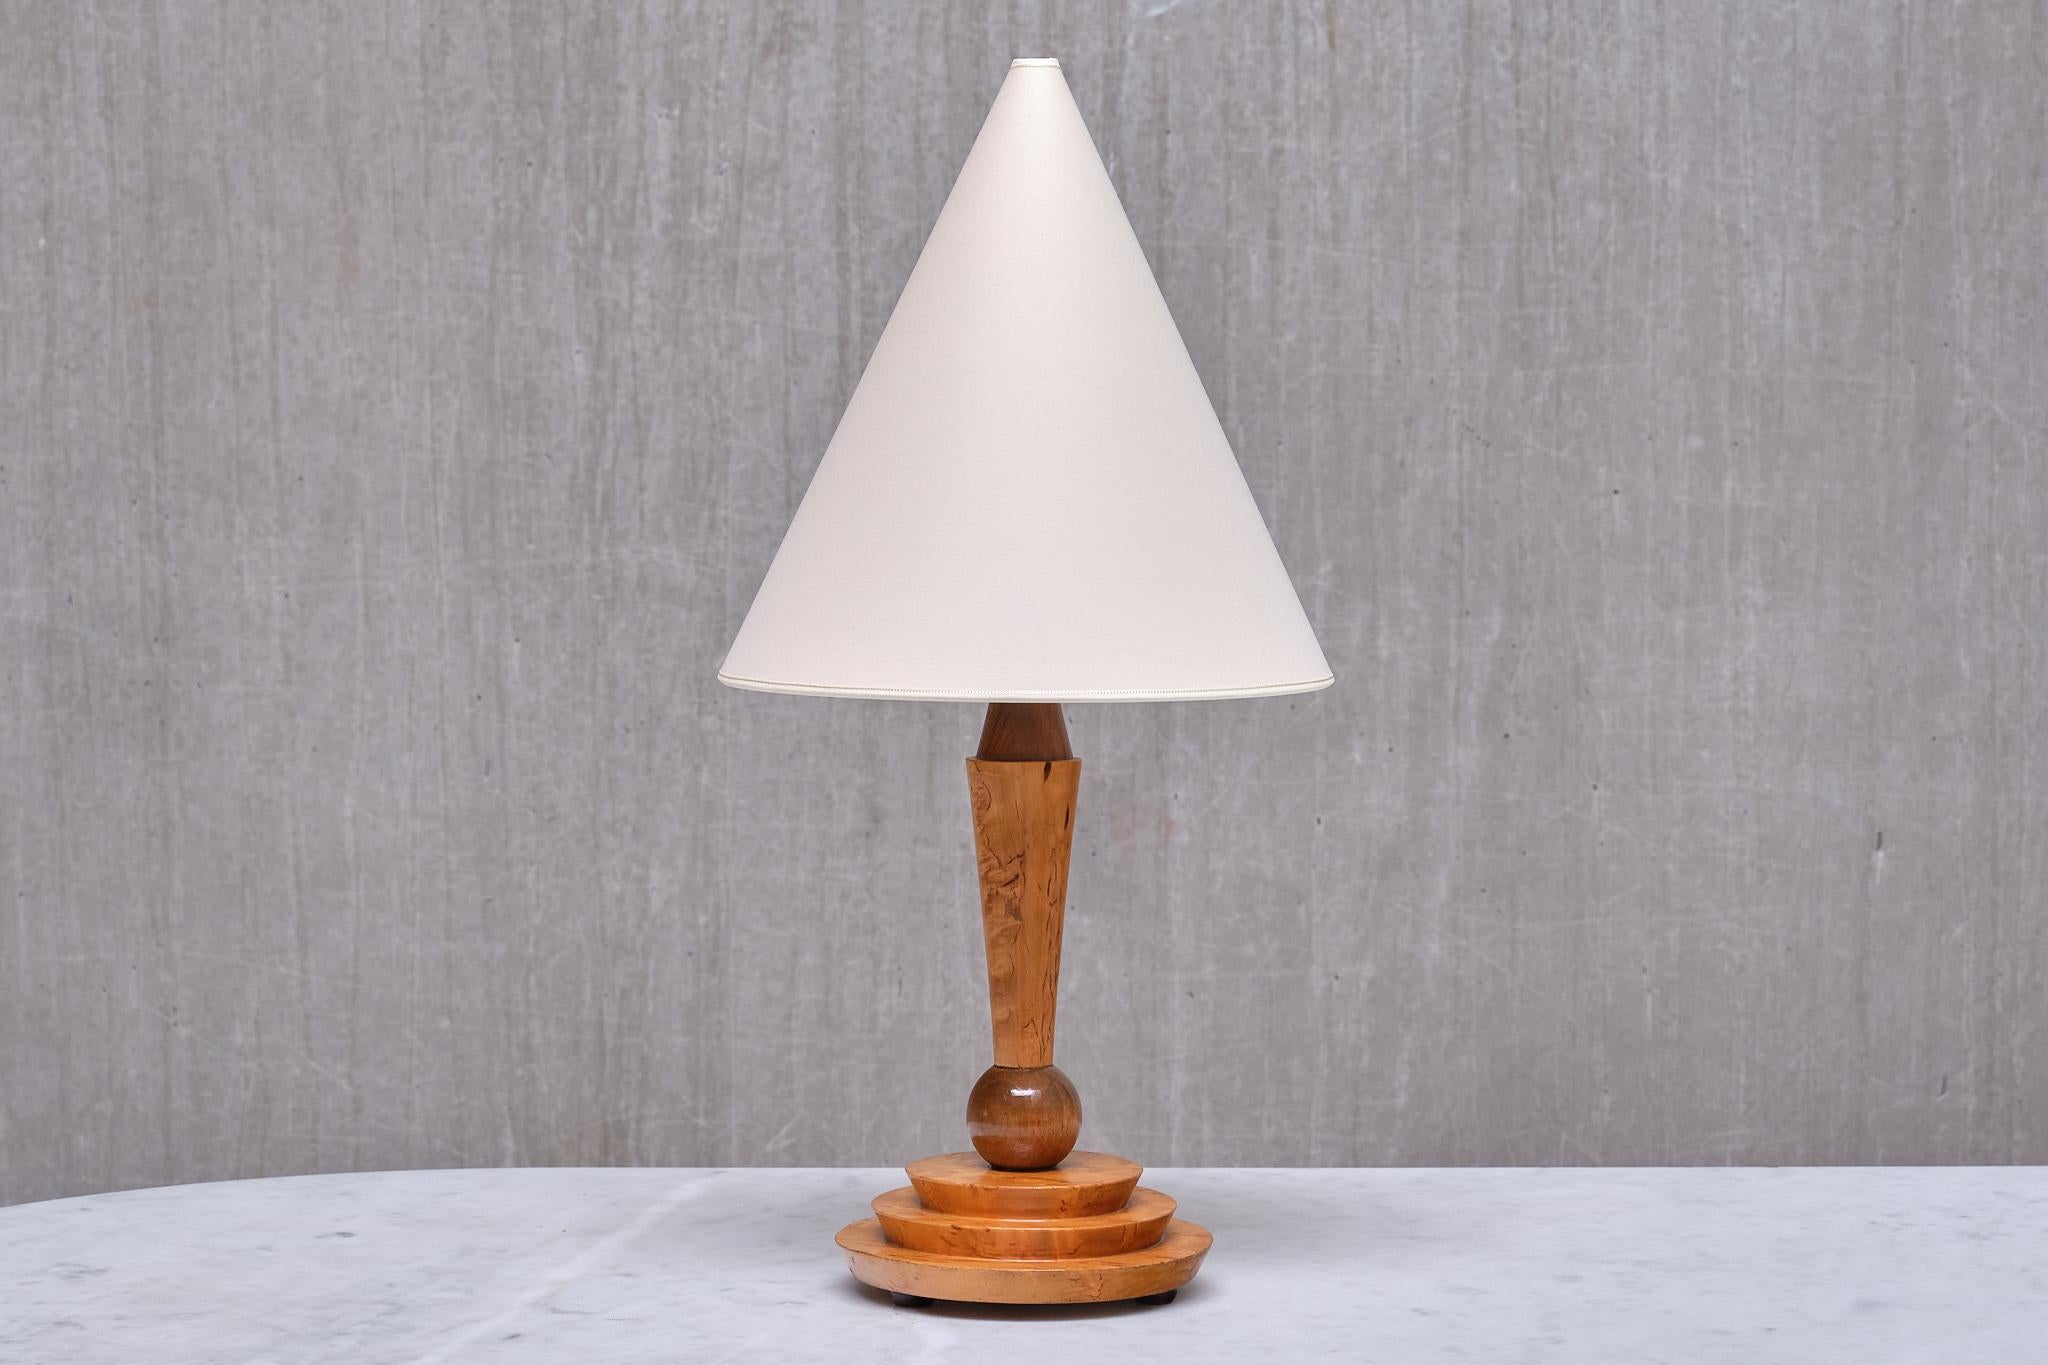 Austrian Art Deco Table Lamp in Birdseye Maple with Ivory Colored Shade, Austria, 1930s For Sale